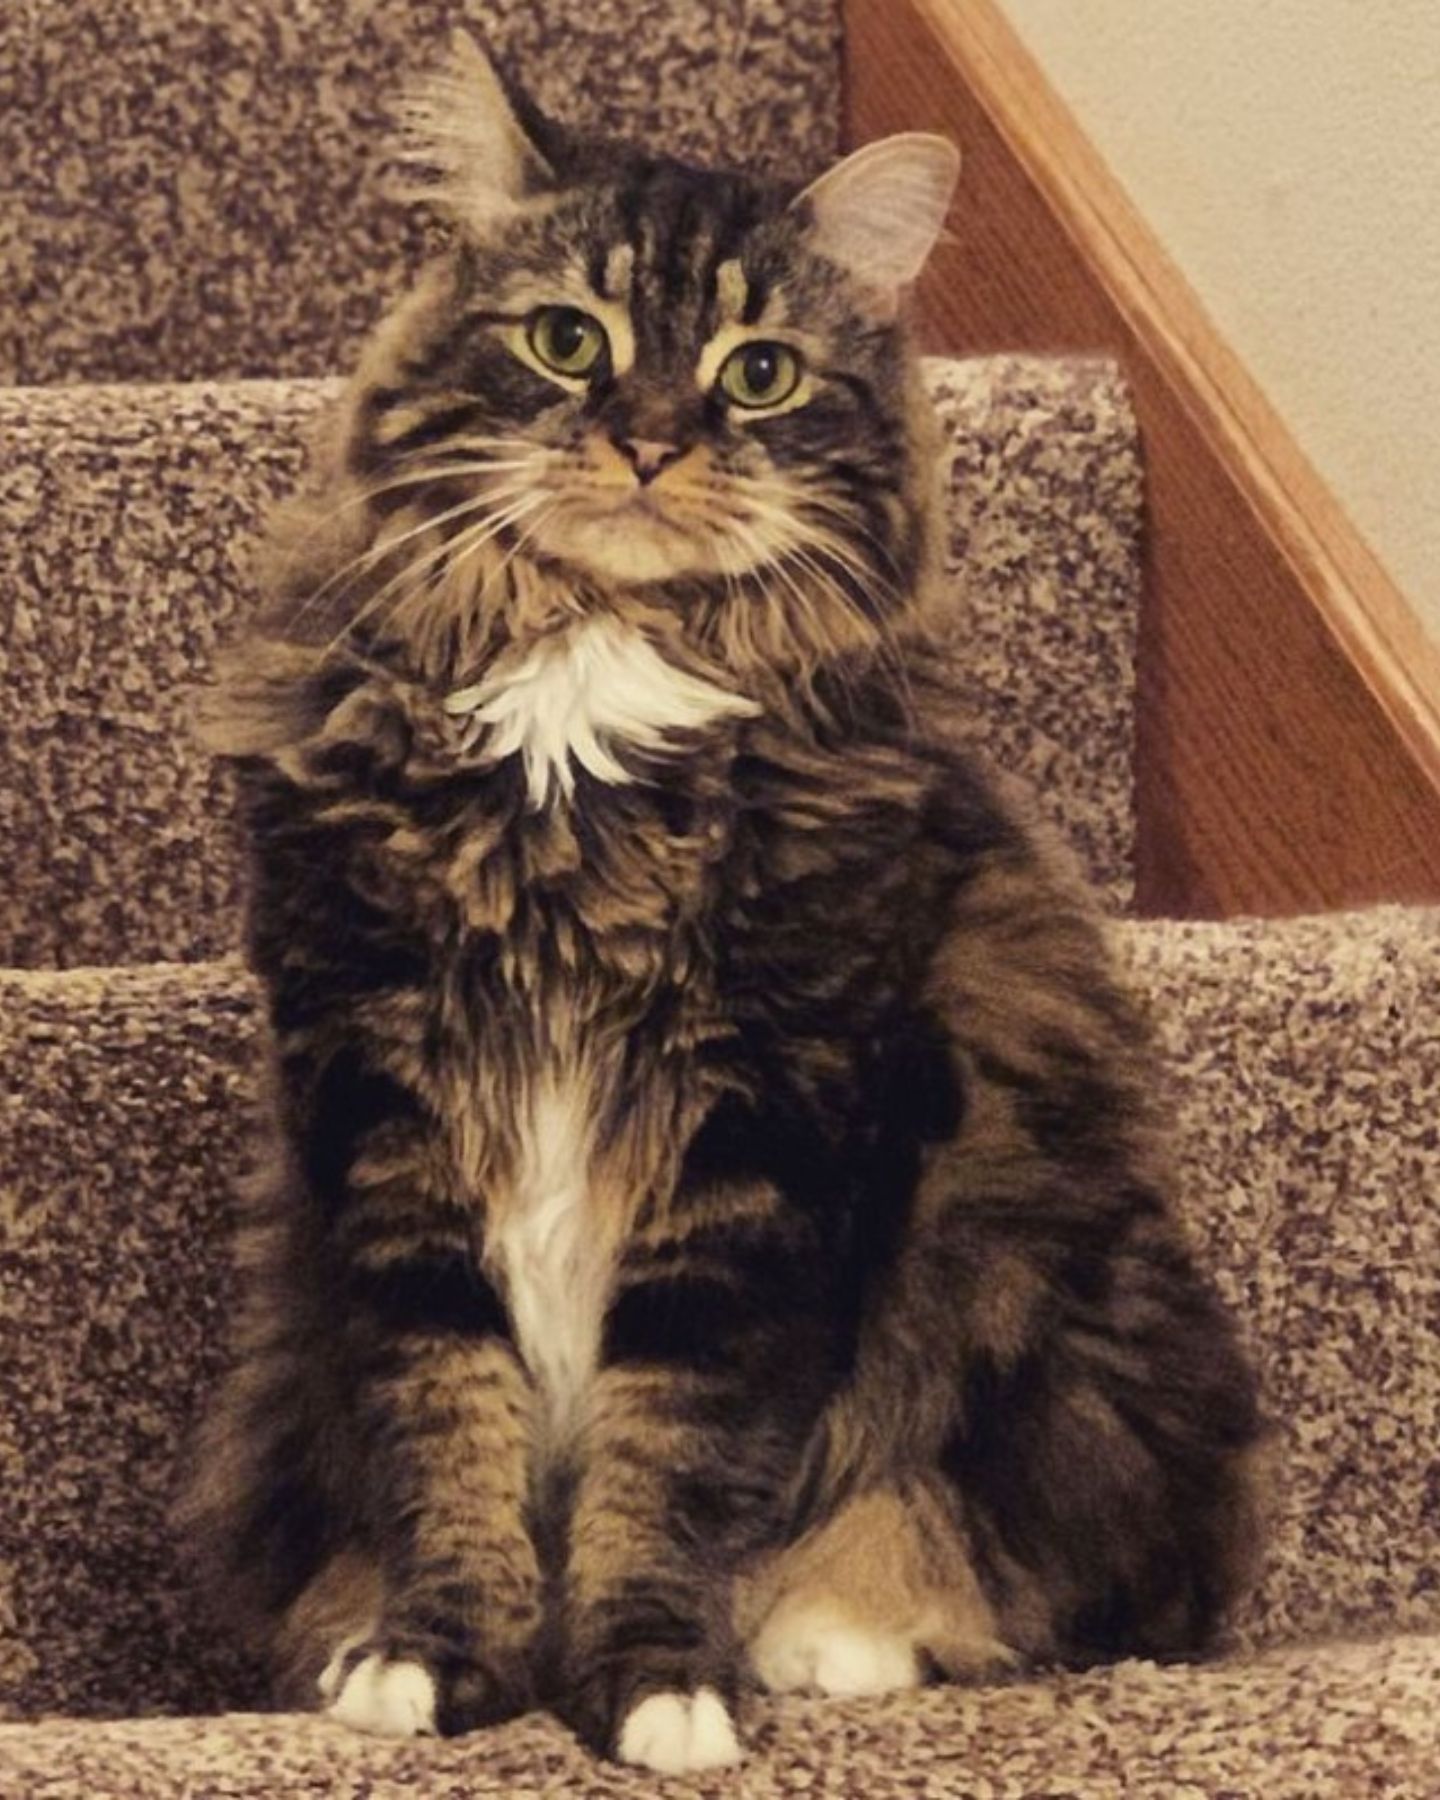 cat on stairs